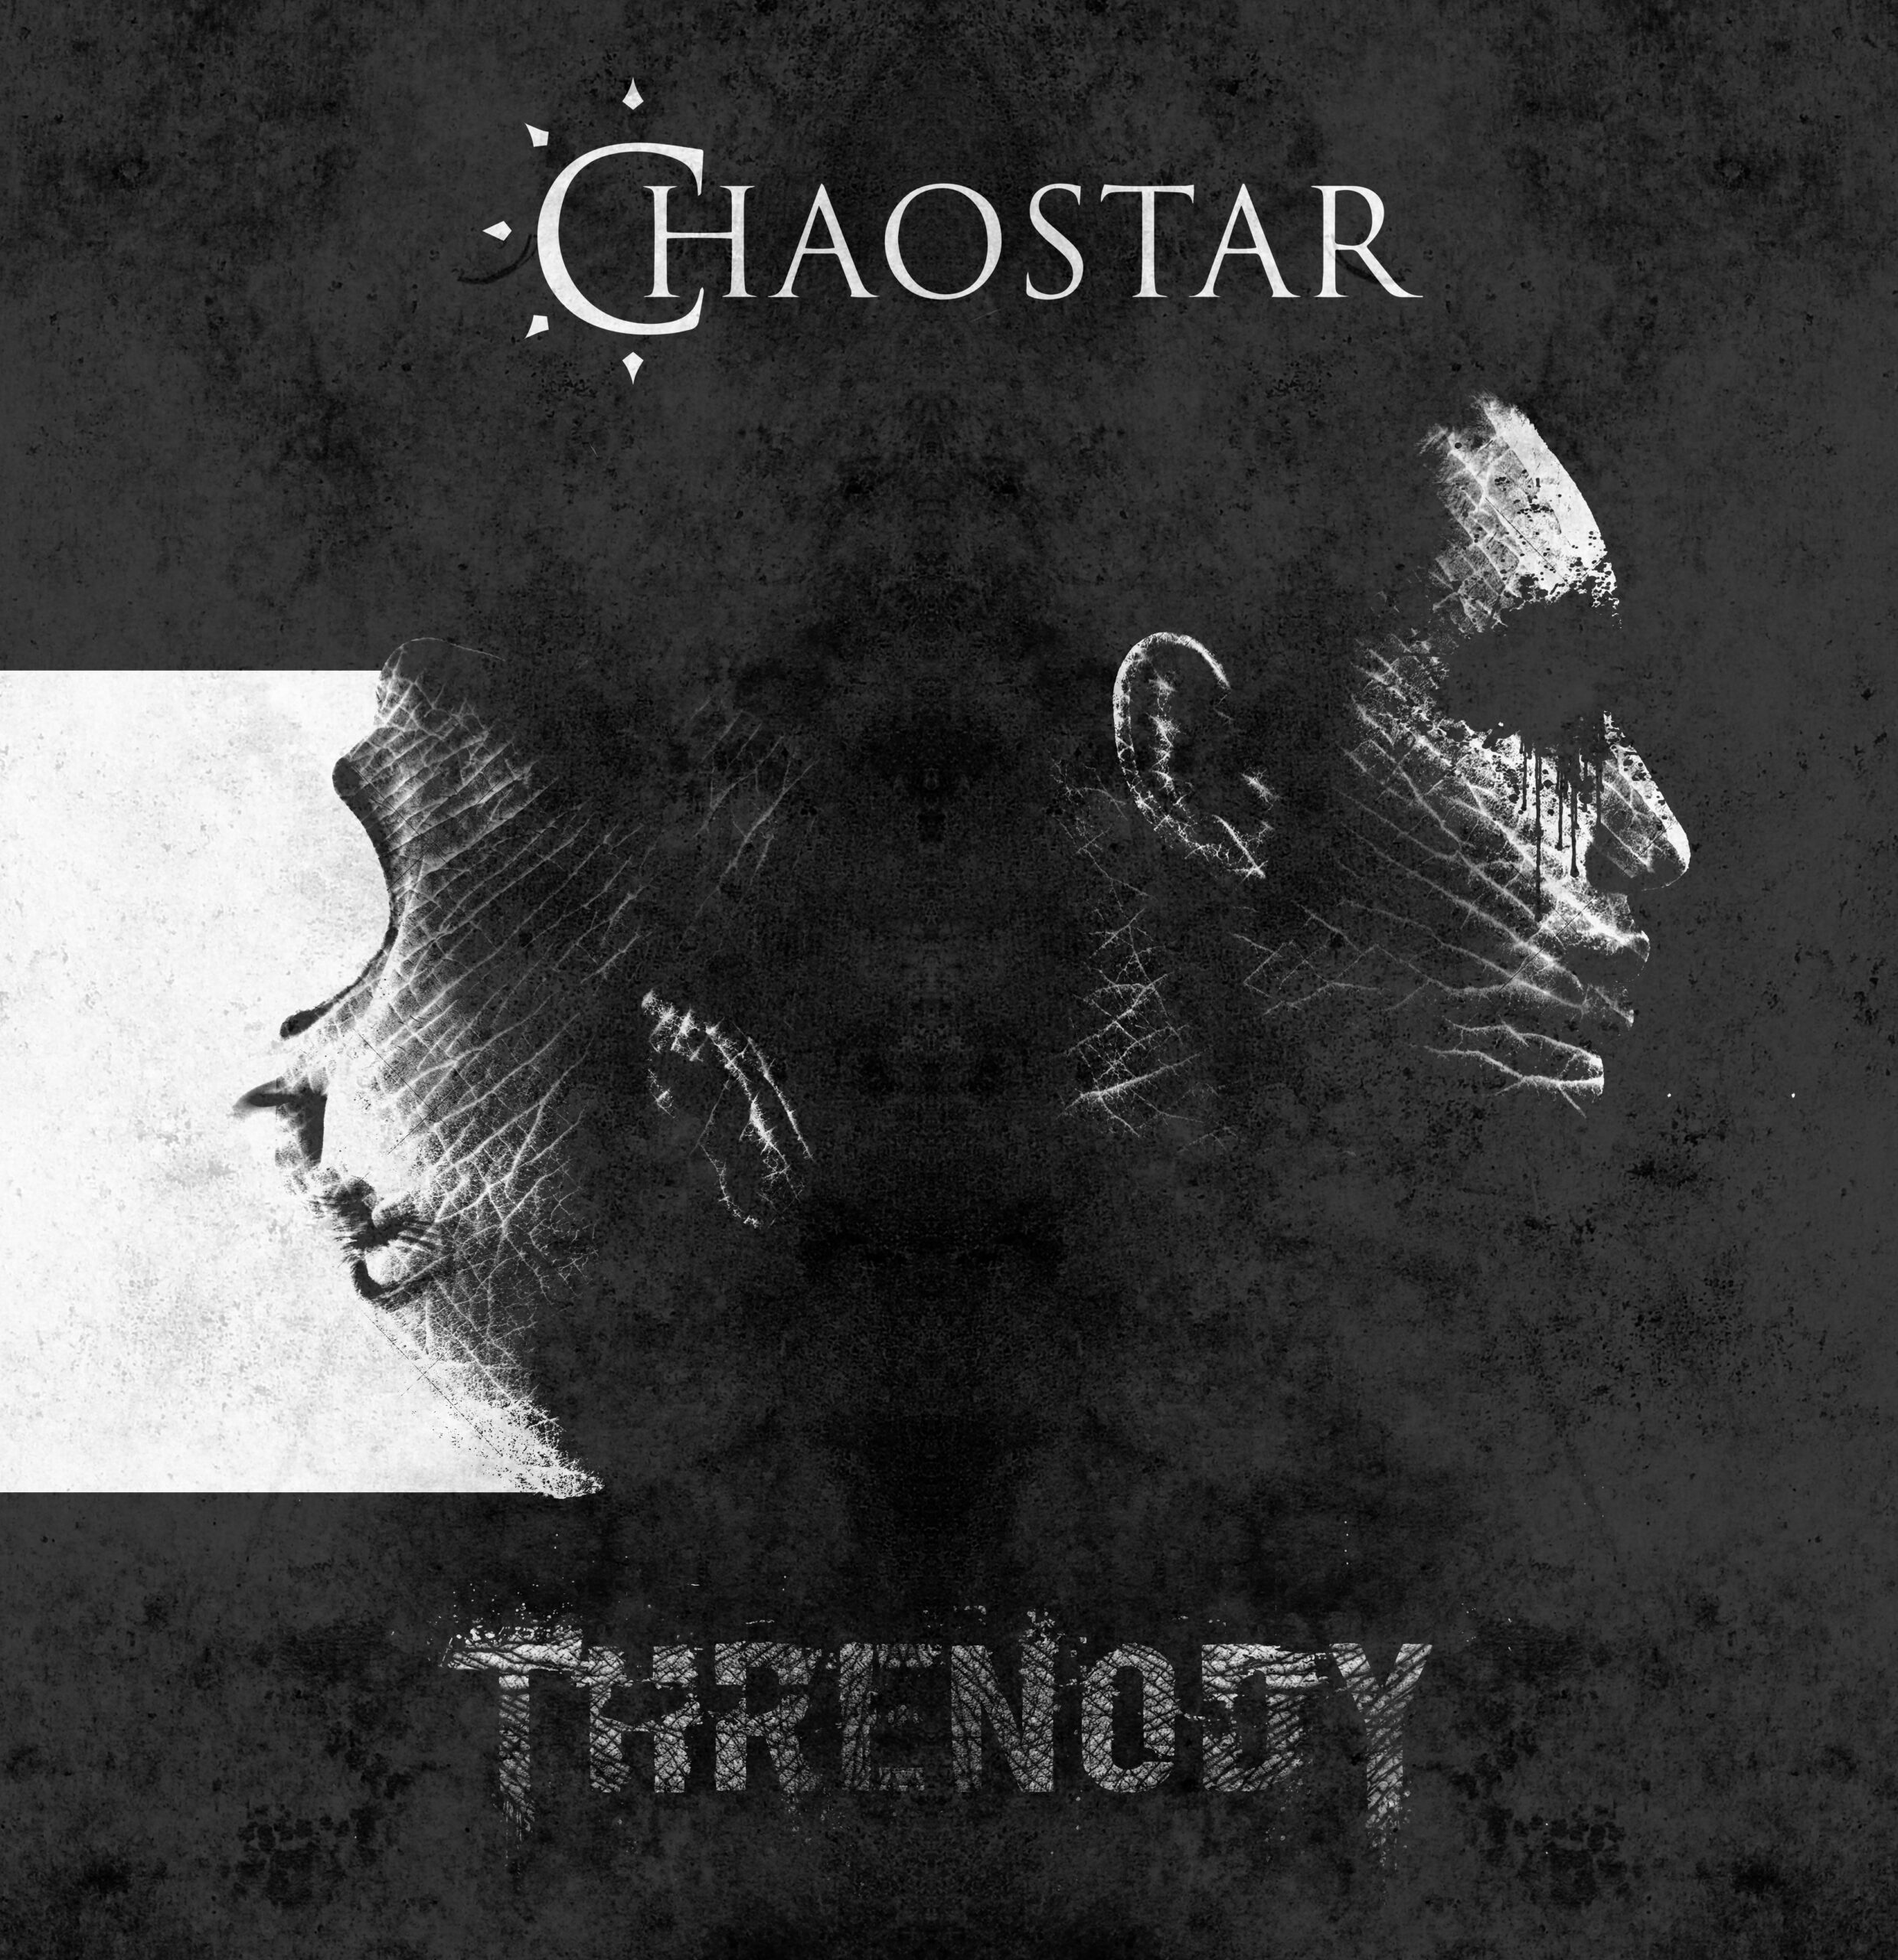 You are currently viewing Chaostar – “Hel” streaming